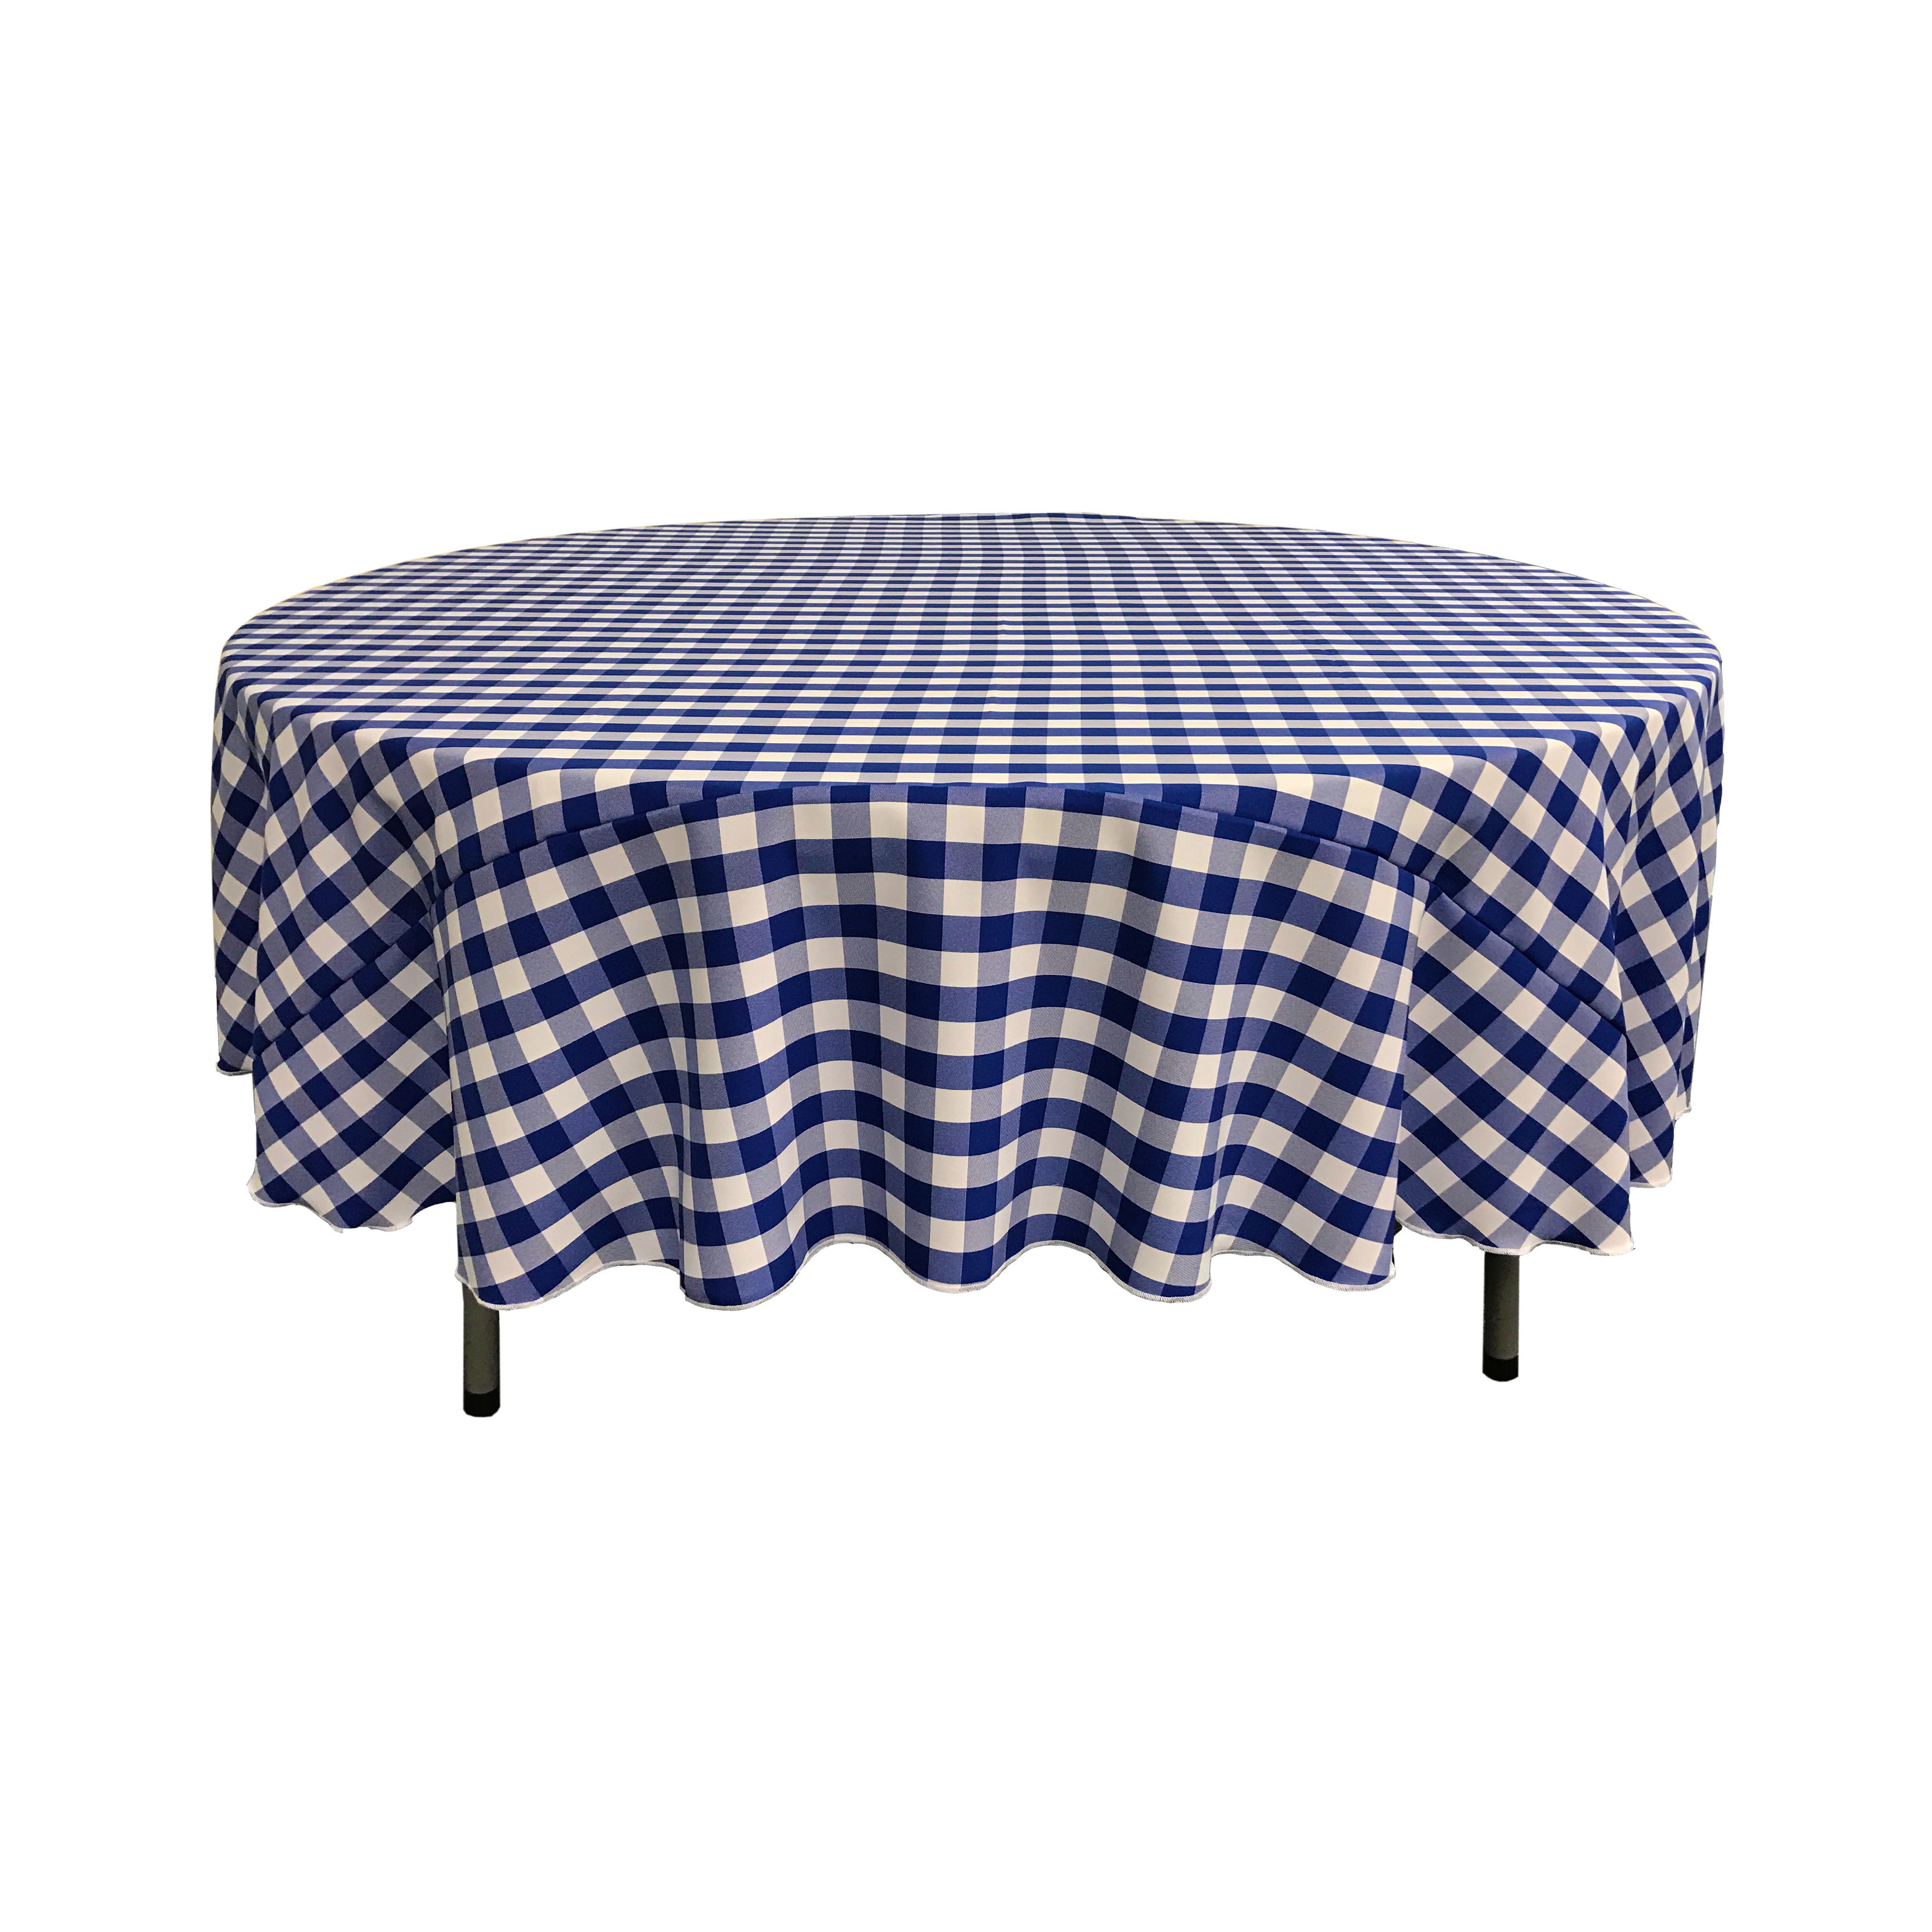 10 Checkered Tablecloths 72"×72" Square Overlays Polyester Gingham Buffalo Check 